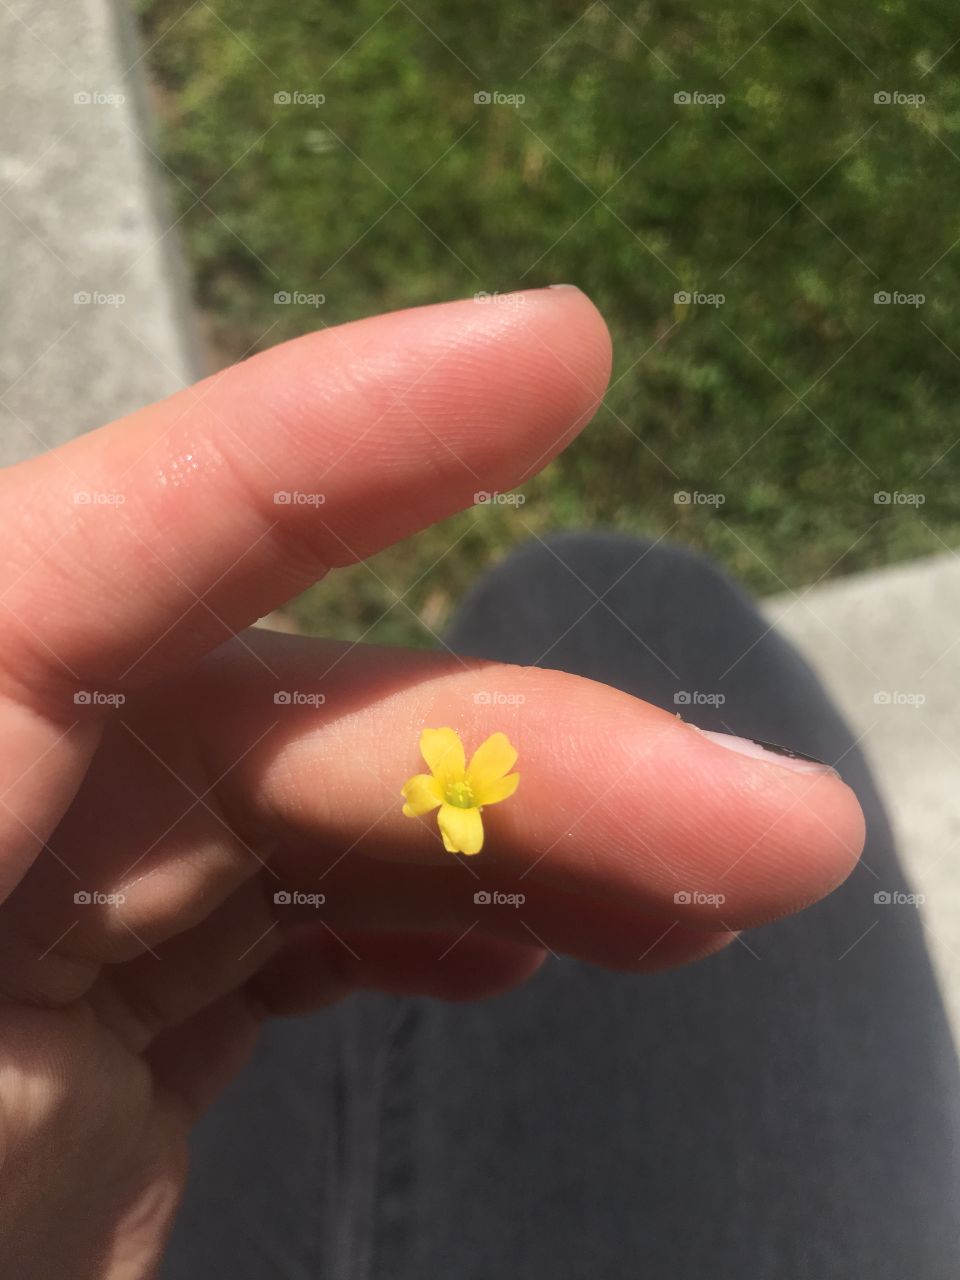 Even tiny weeds contain beauty 